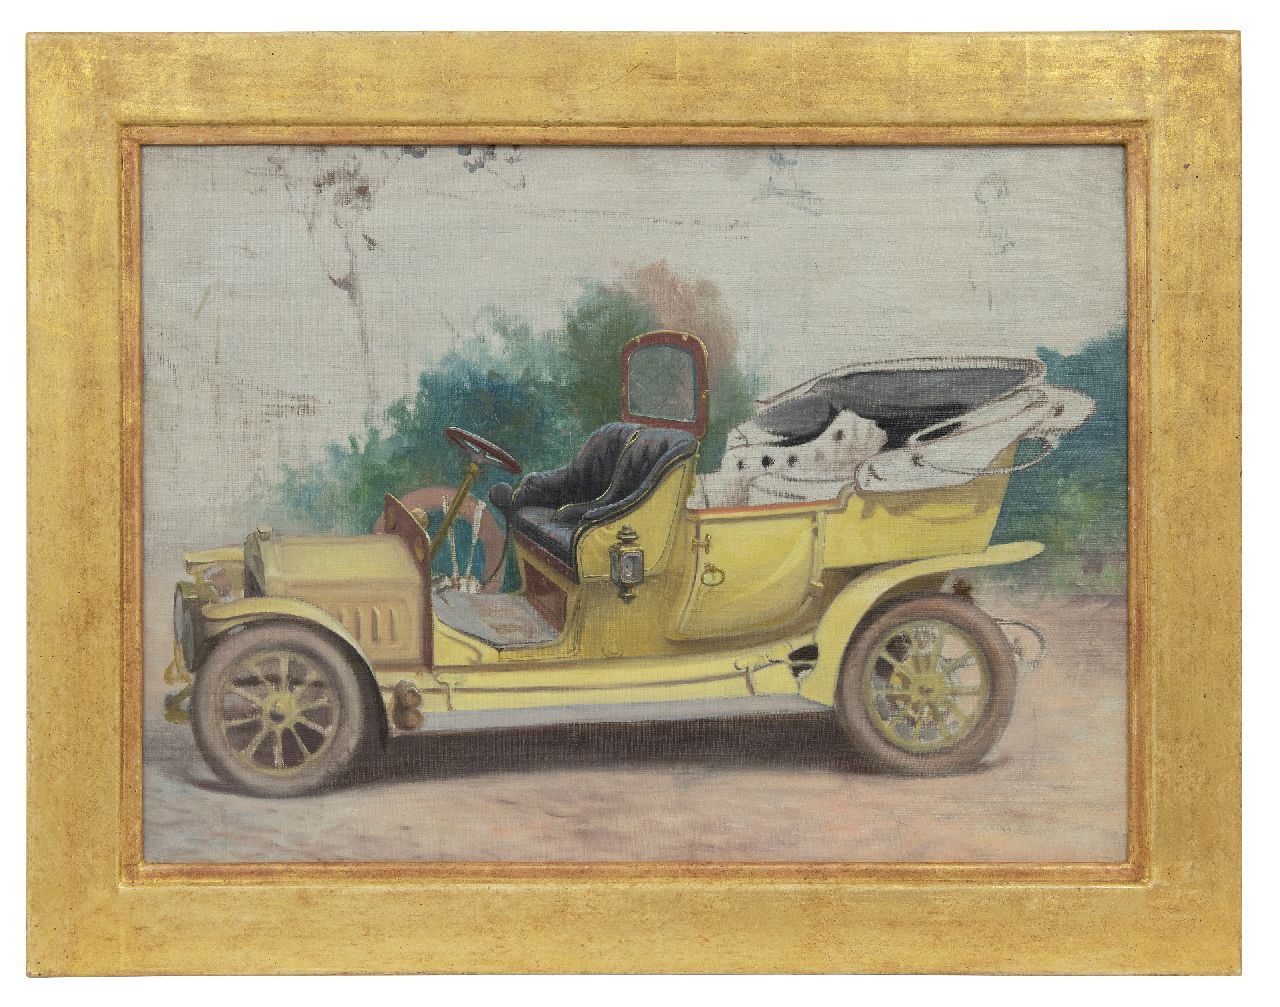 Onbekend   | Onbekend | Paintings offered for sale | Antique car, oil on canvas 48.1 x 66.0 cm